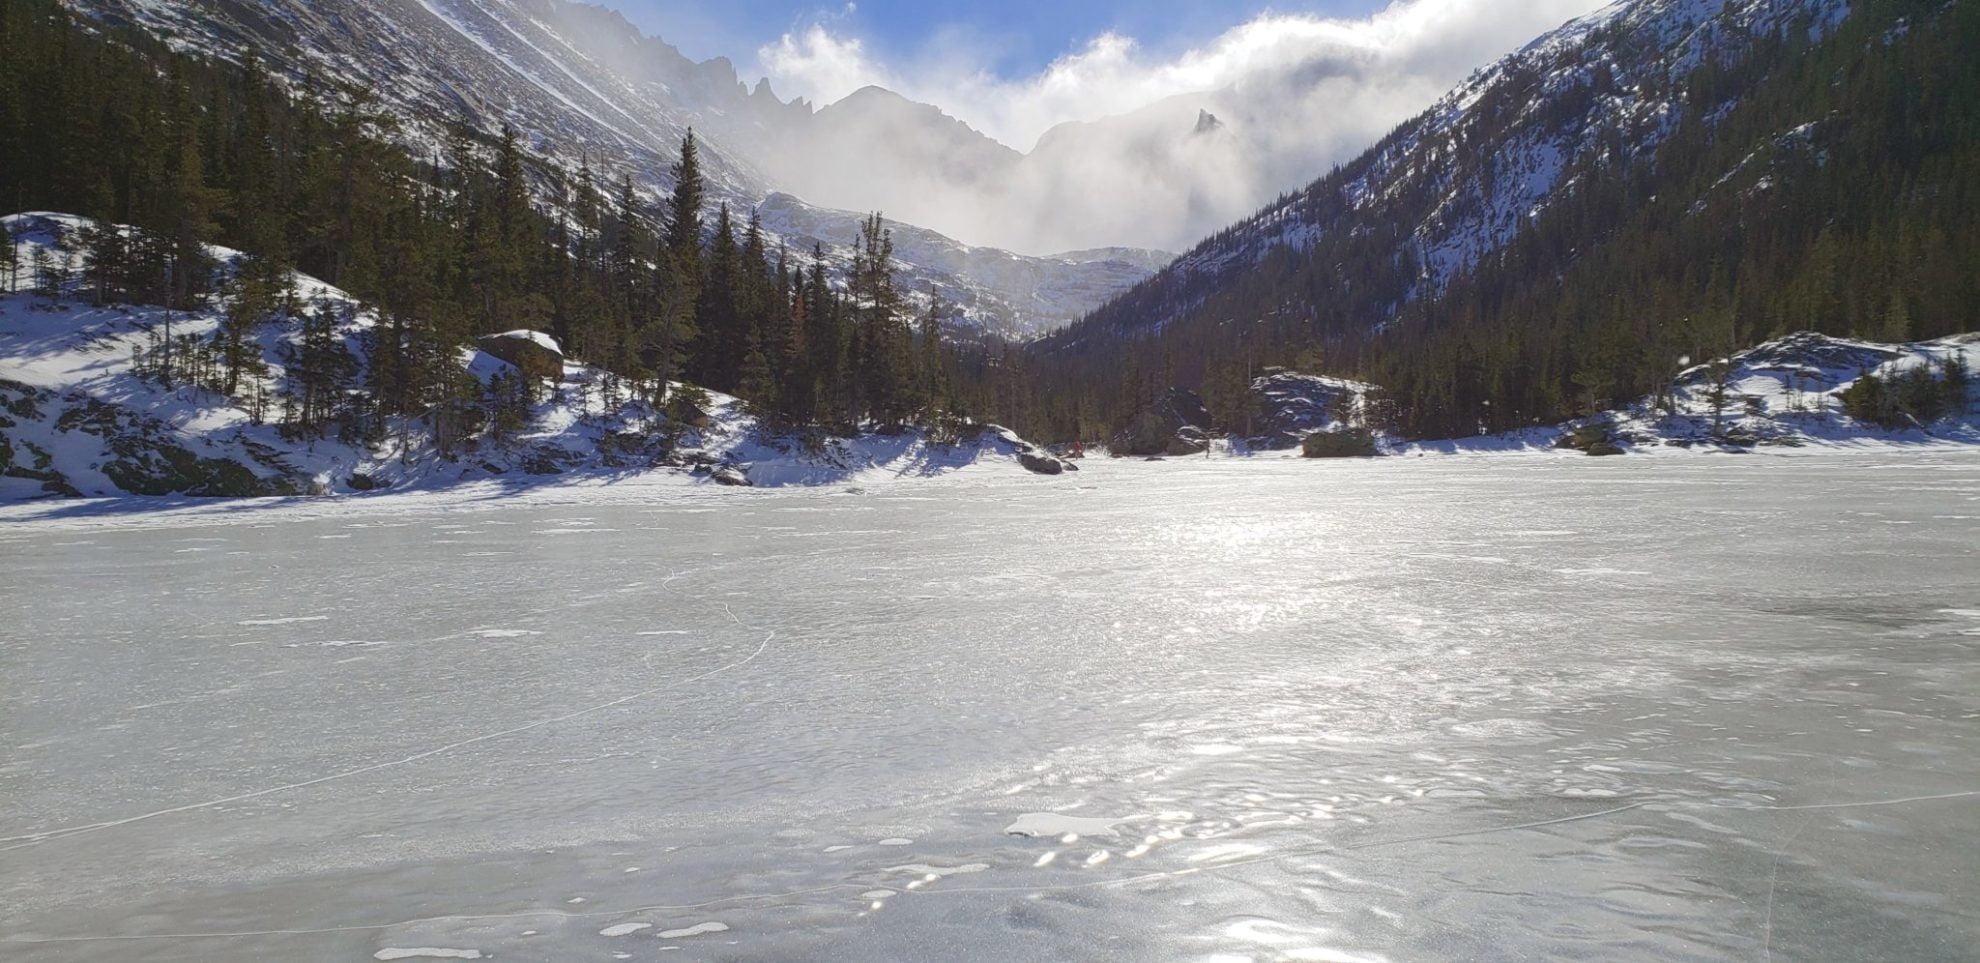 Mills Lake with Storm Peak (left) and Spearhead (right) rising above the blowing snow